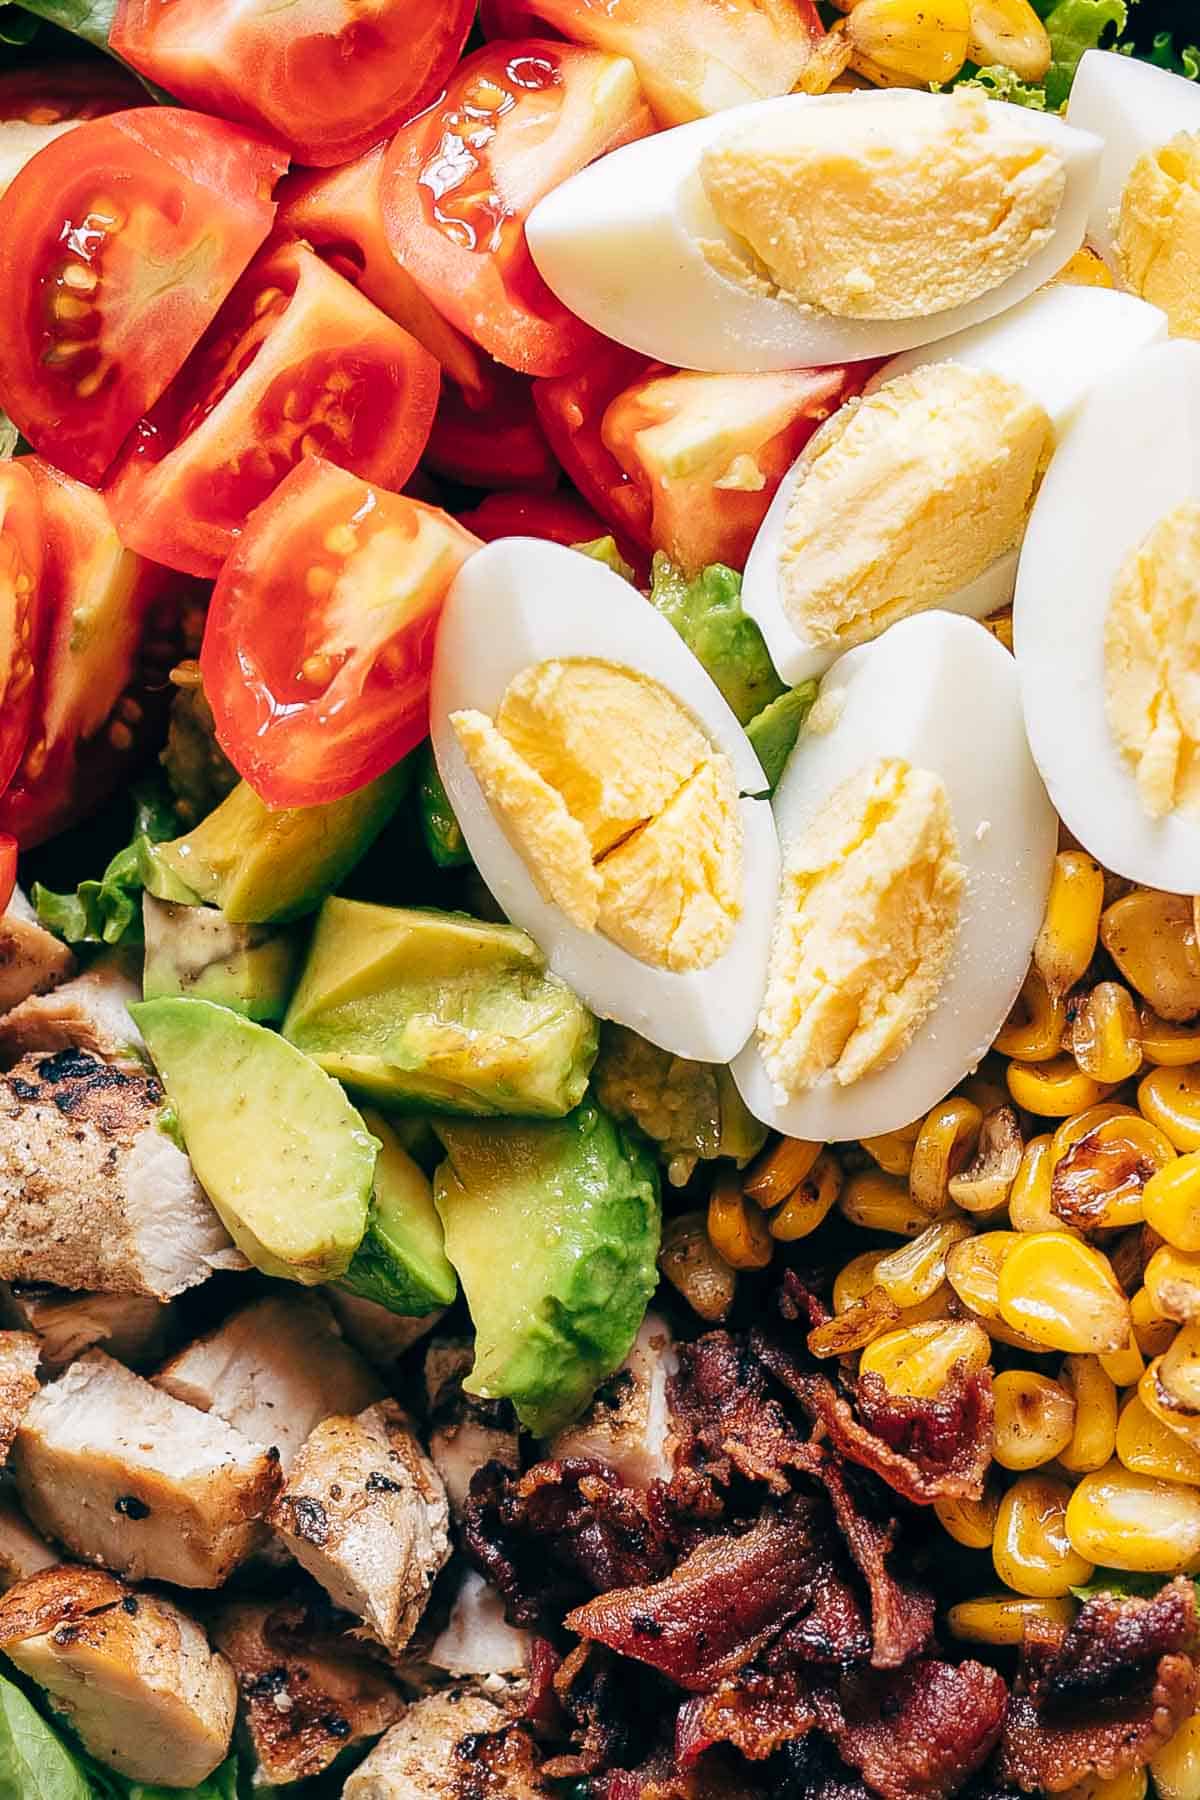 Chicken Cobb Salad served in a bowl - it has lettuce, tomatoes, chicken, bacon, corn and boiled eggs